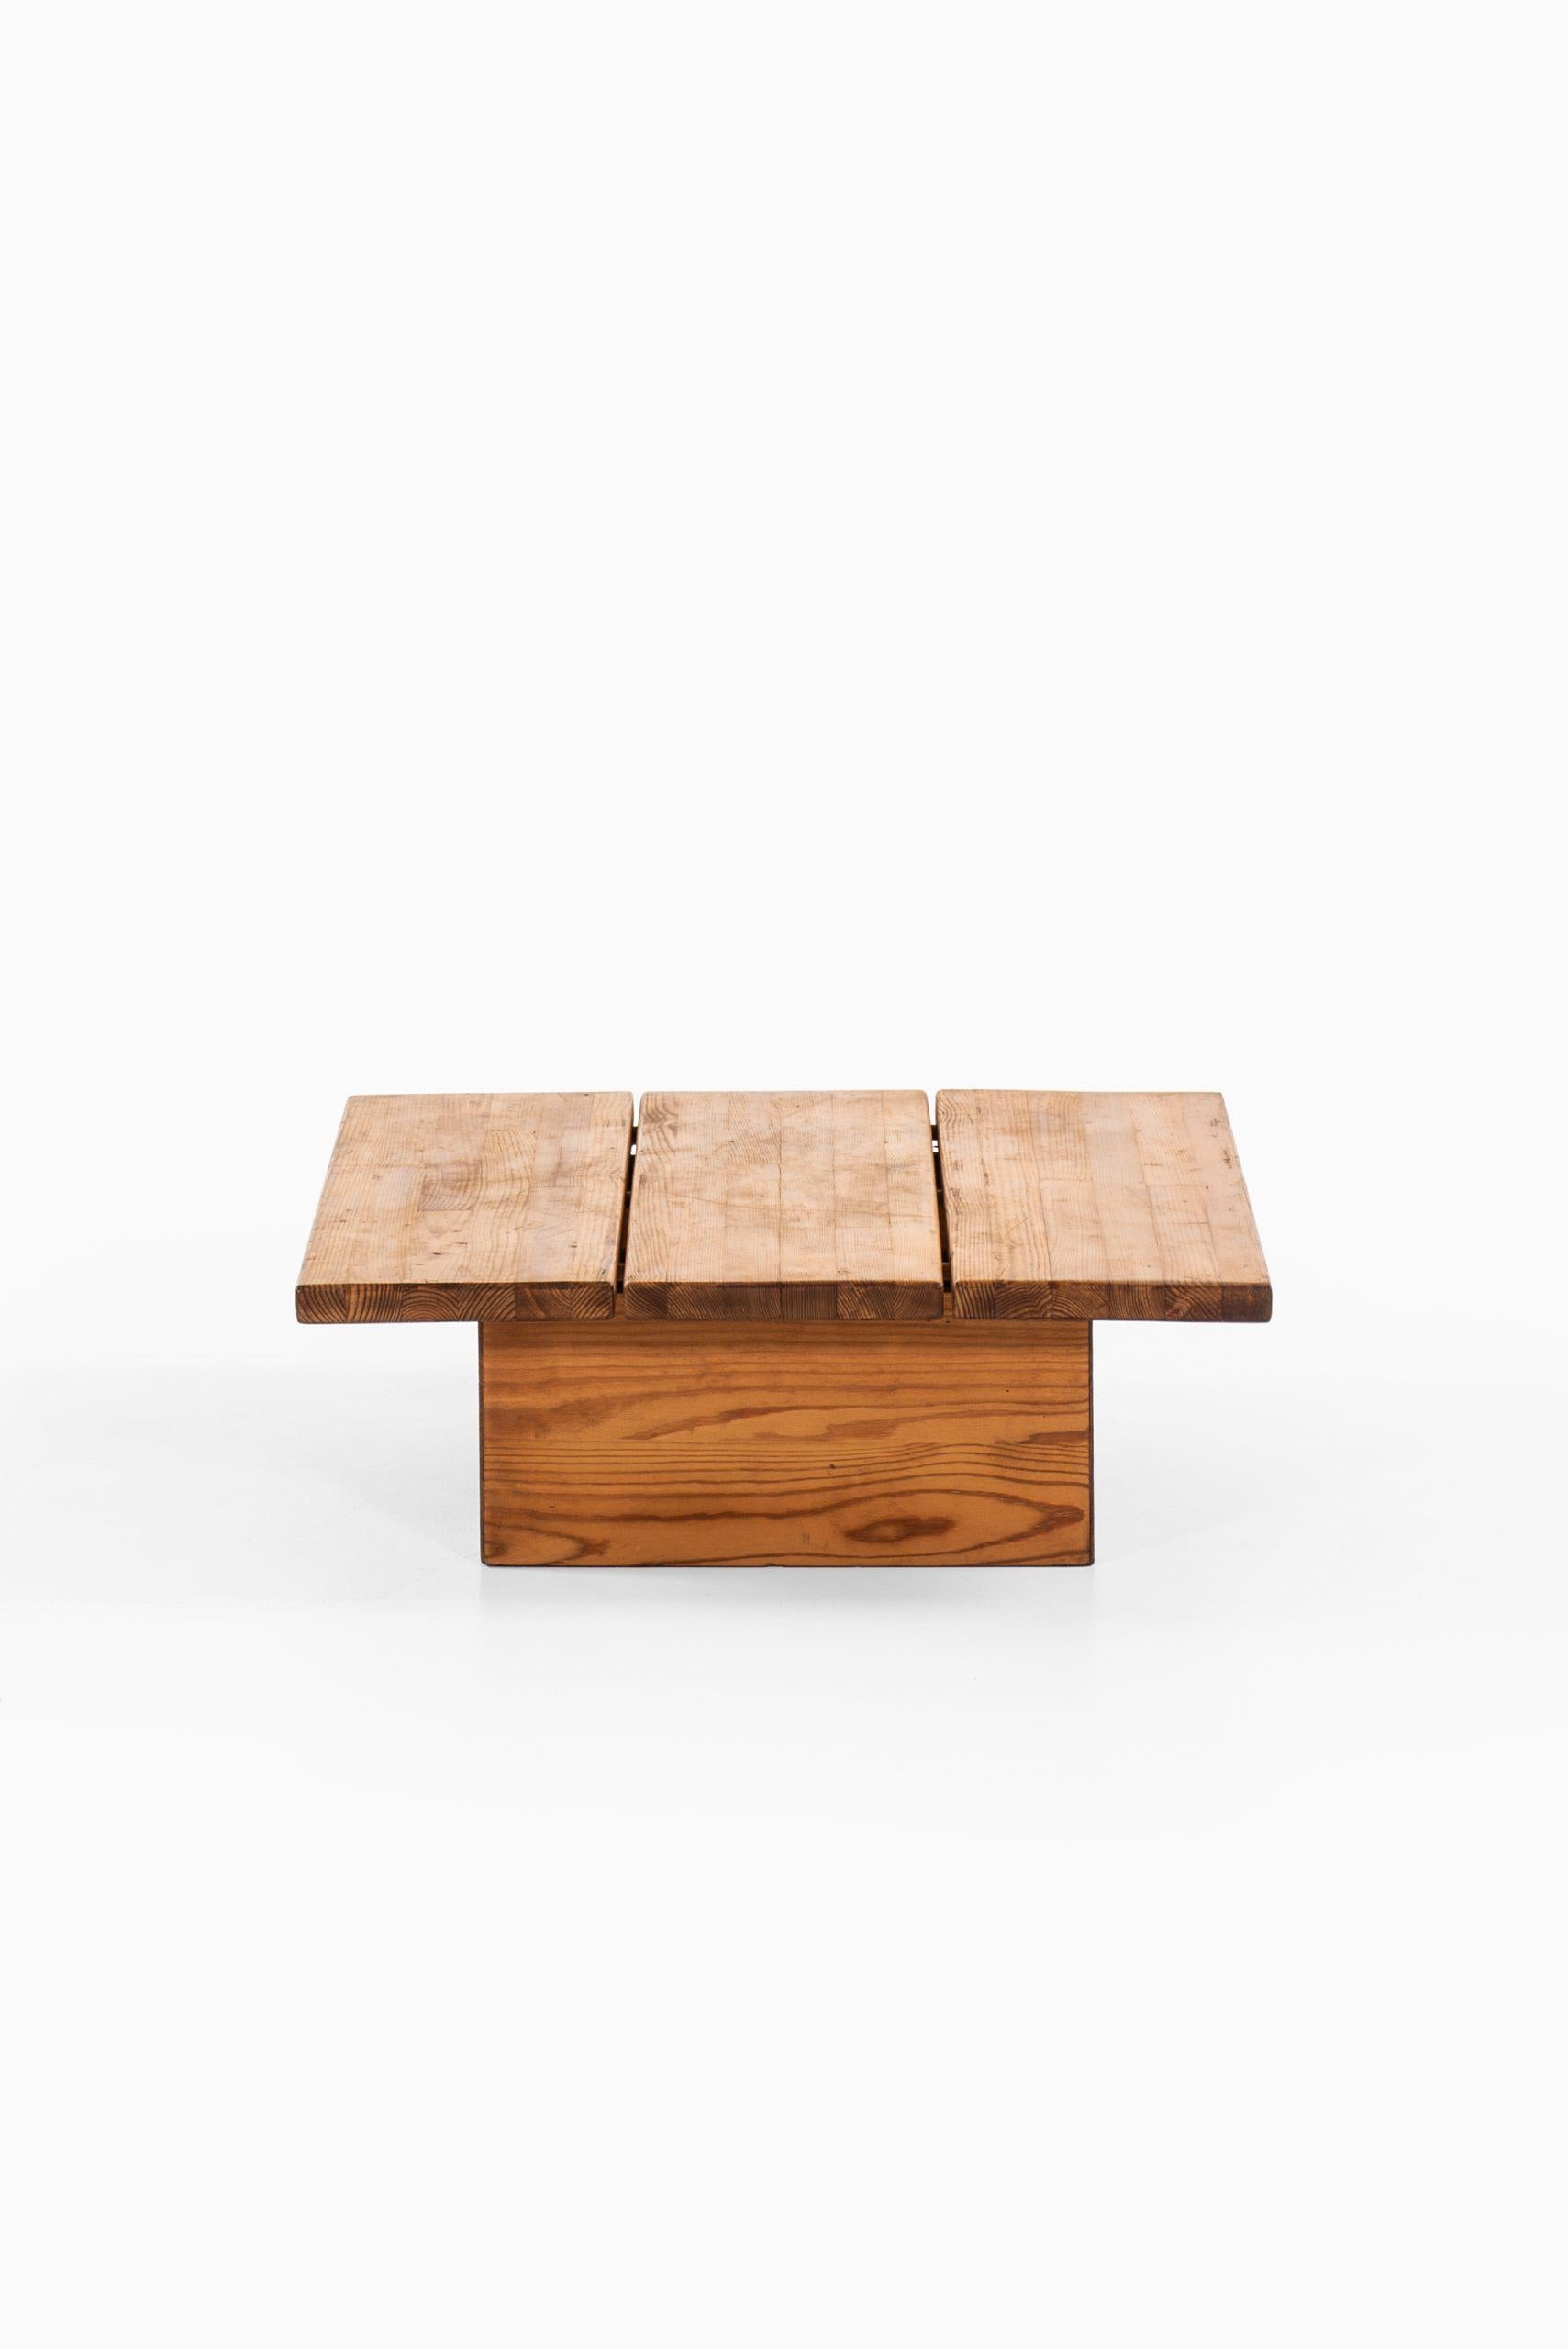 Rare coffee table / side table designed by Ilmari Tapiovaara. Produced by Laukaan Puu in Finland.